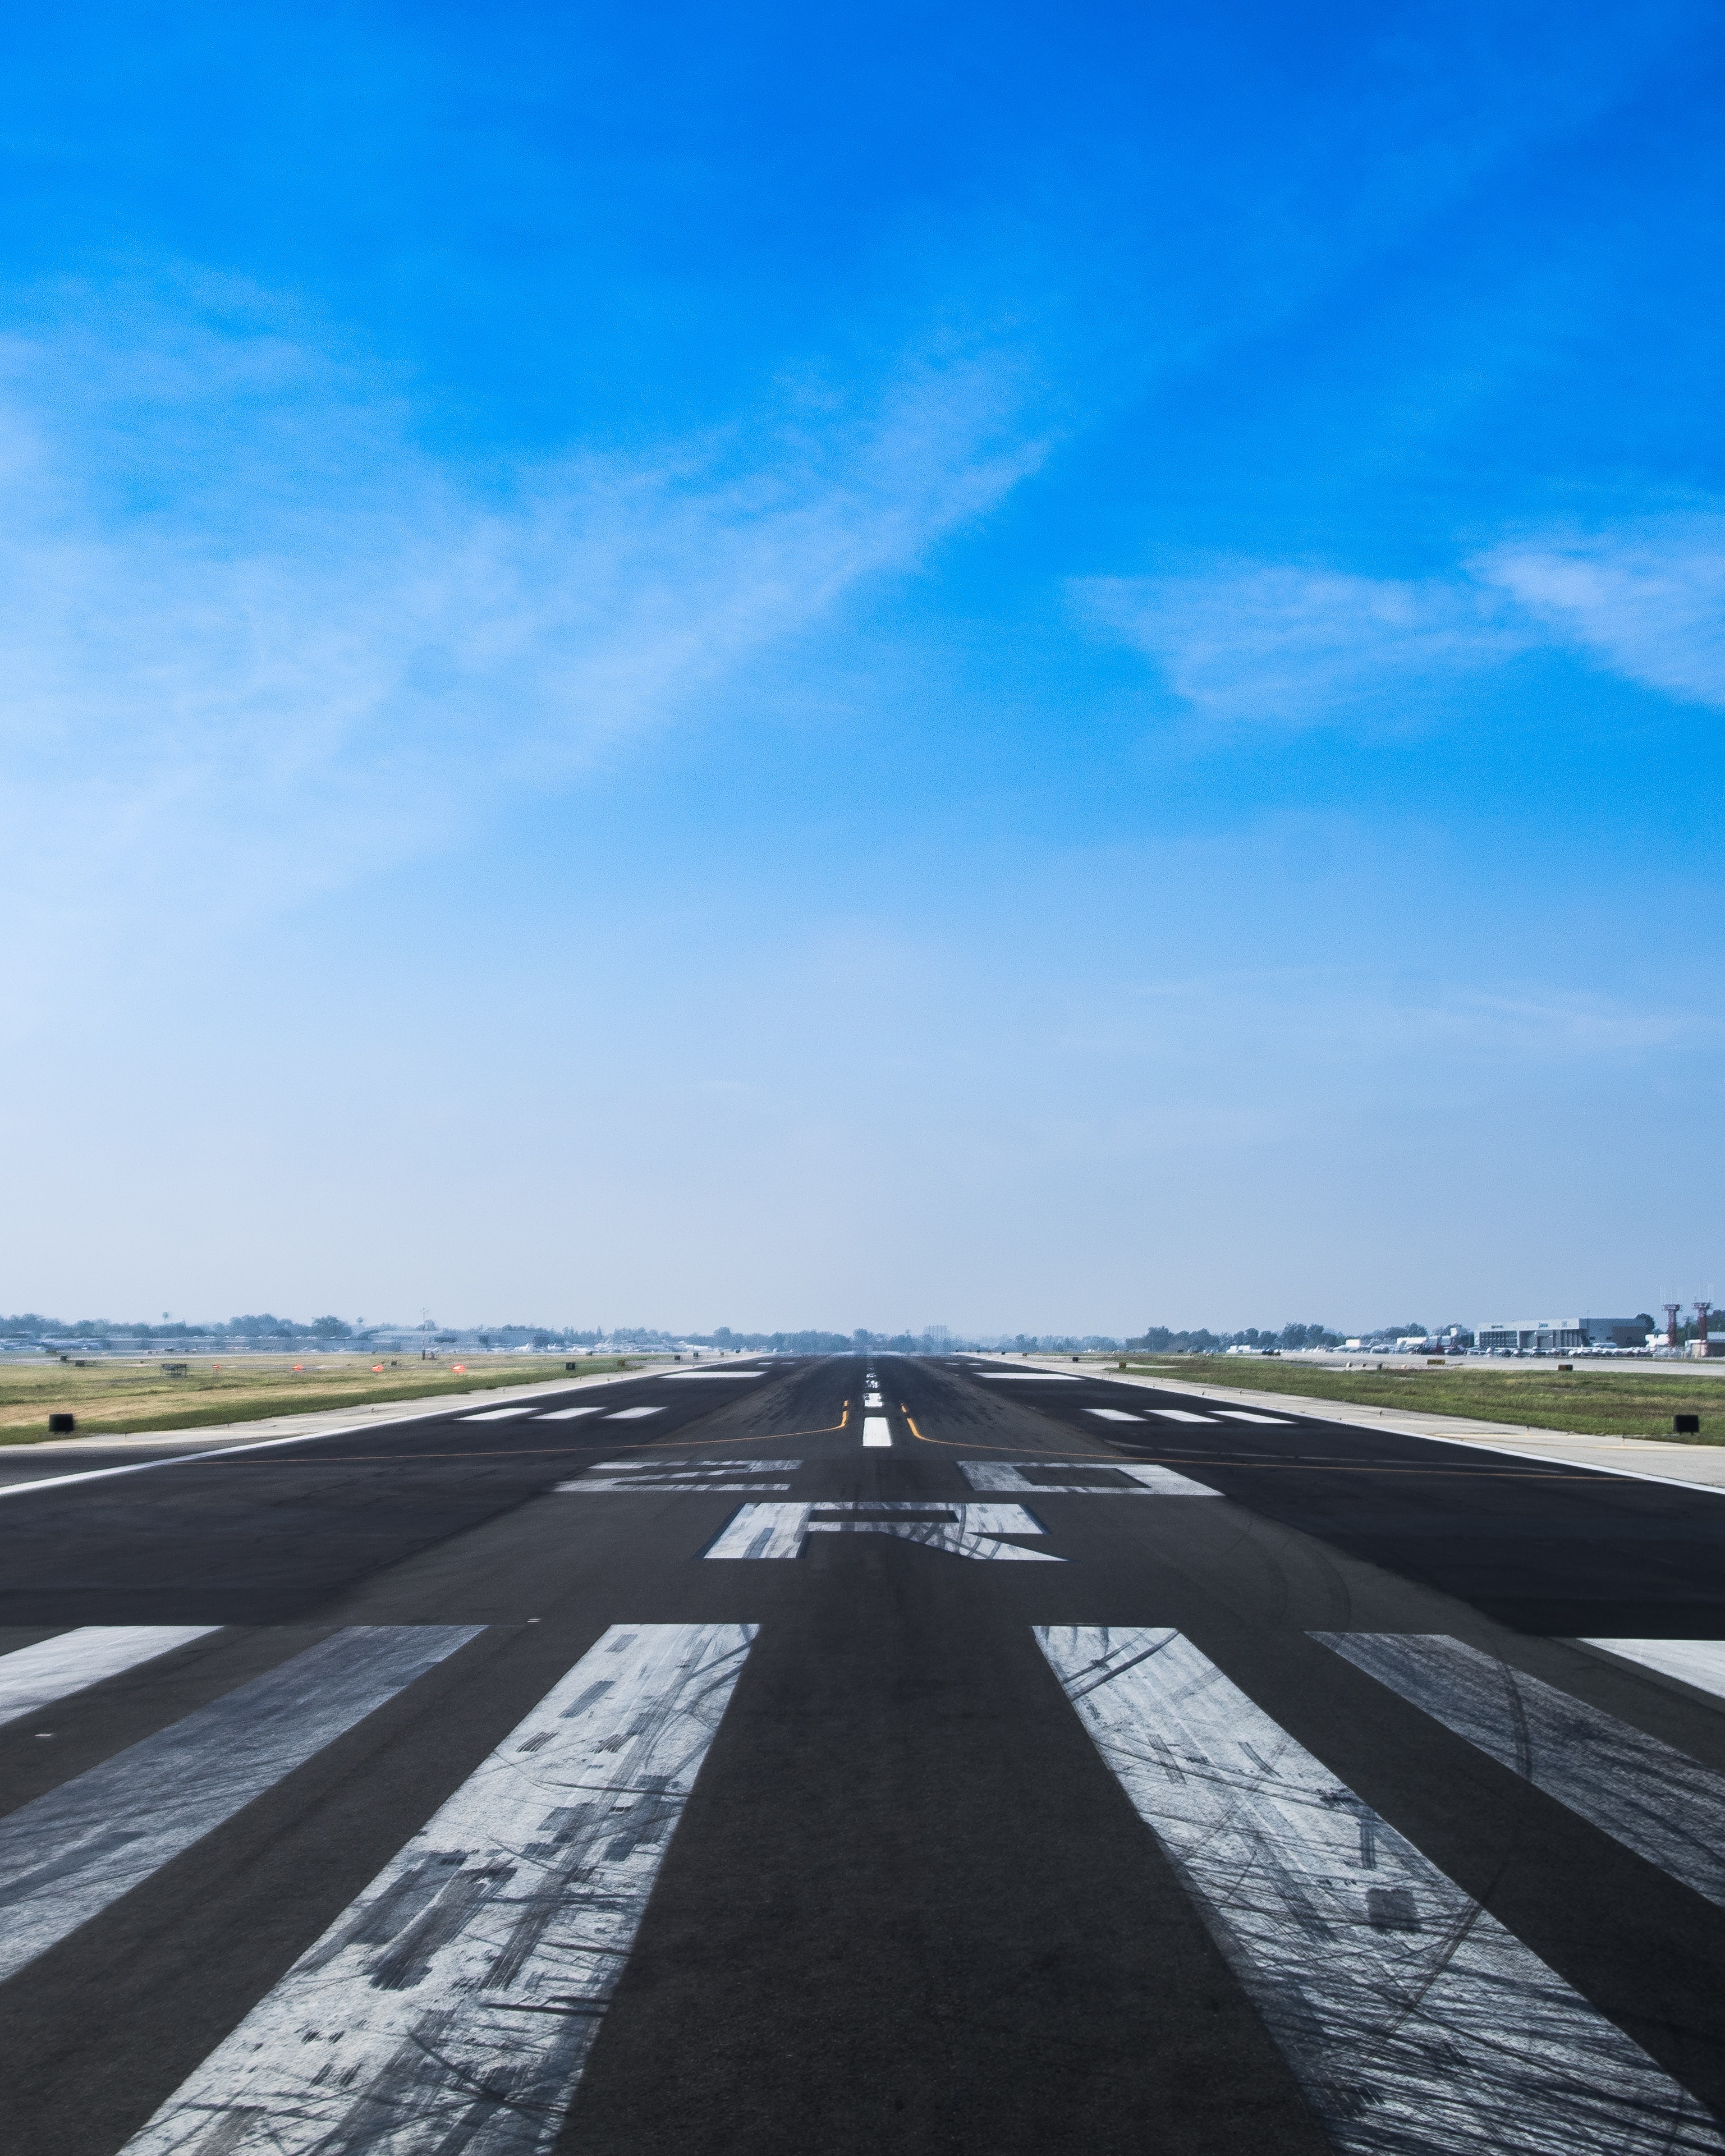 Why does Mumbai airport have a crisscross runway?